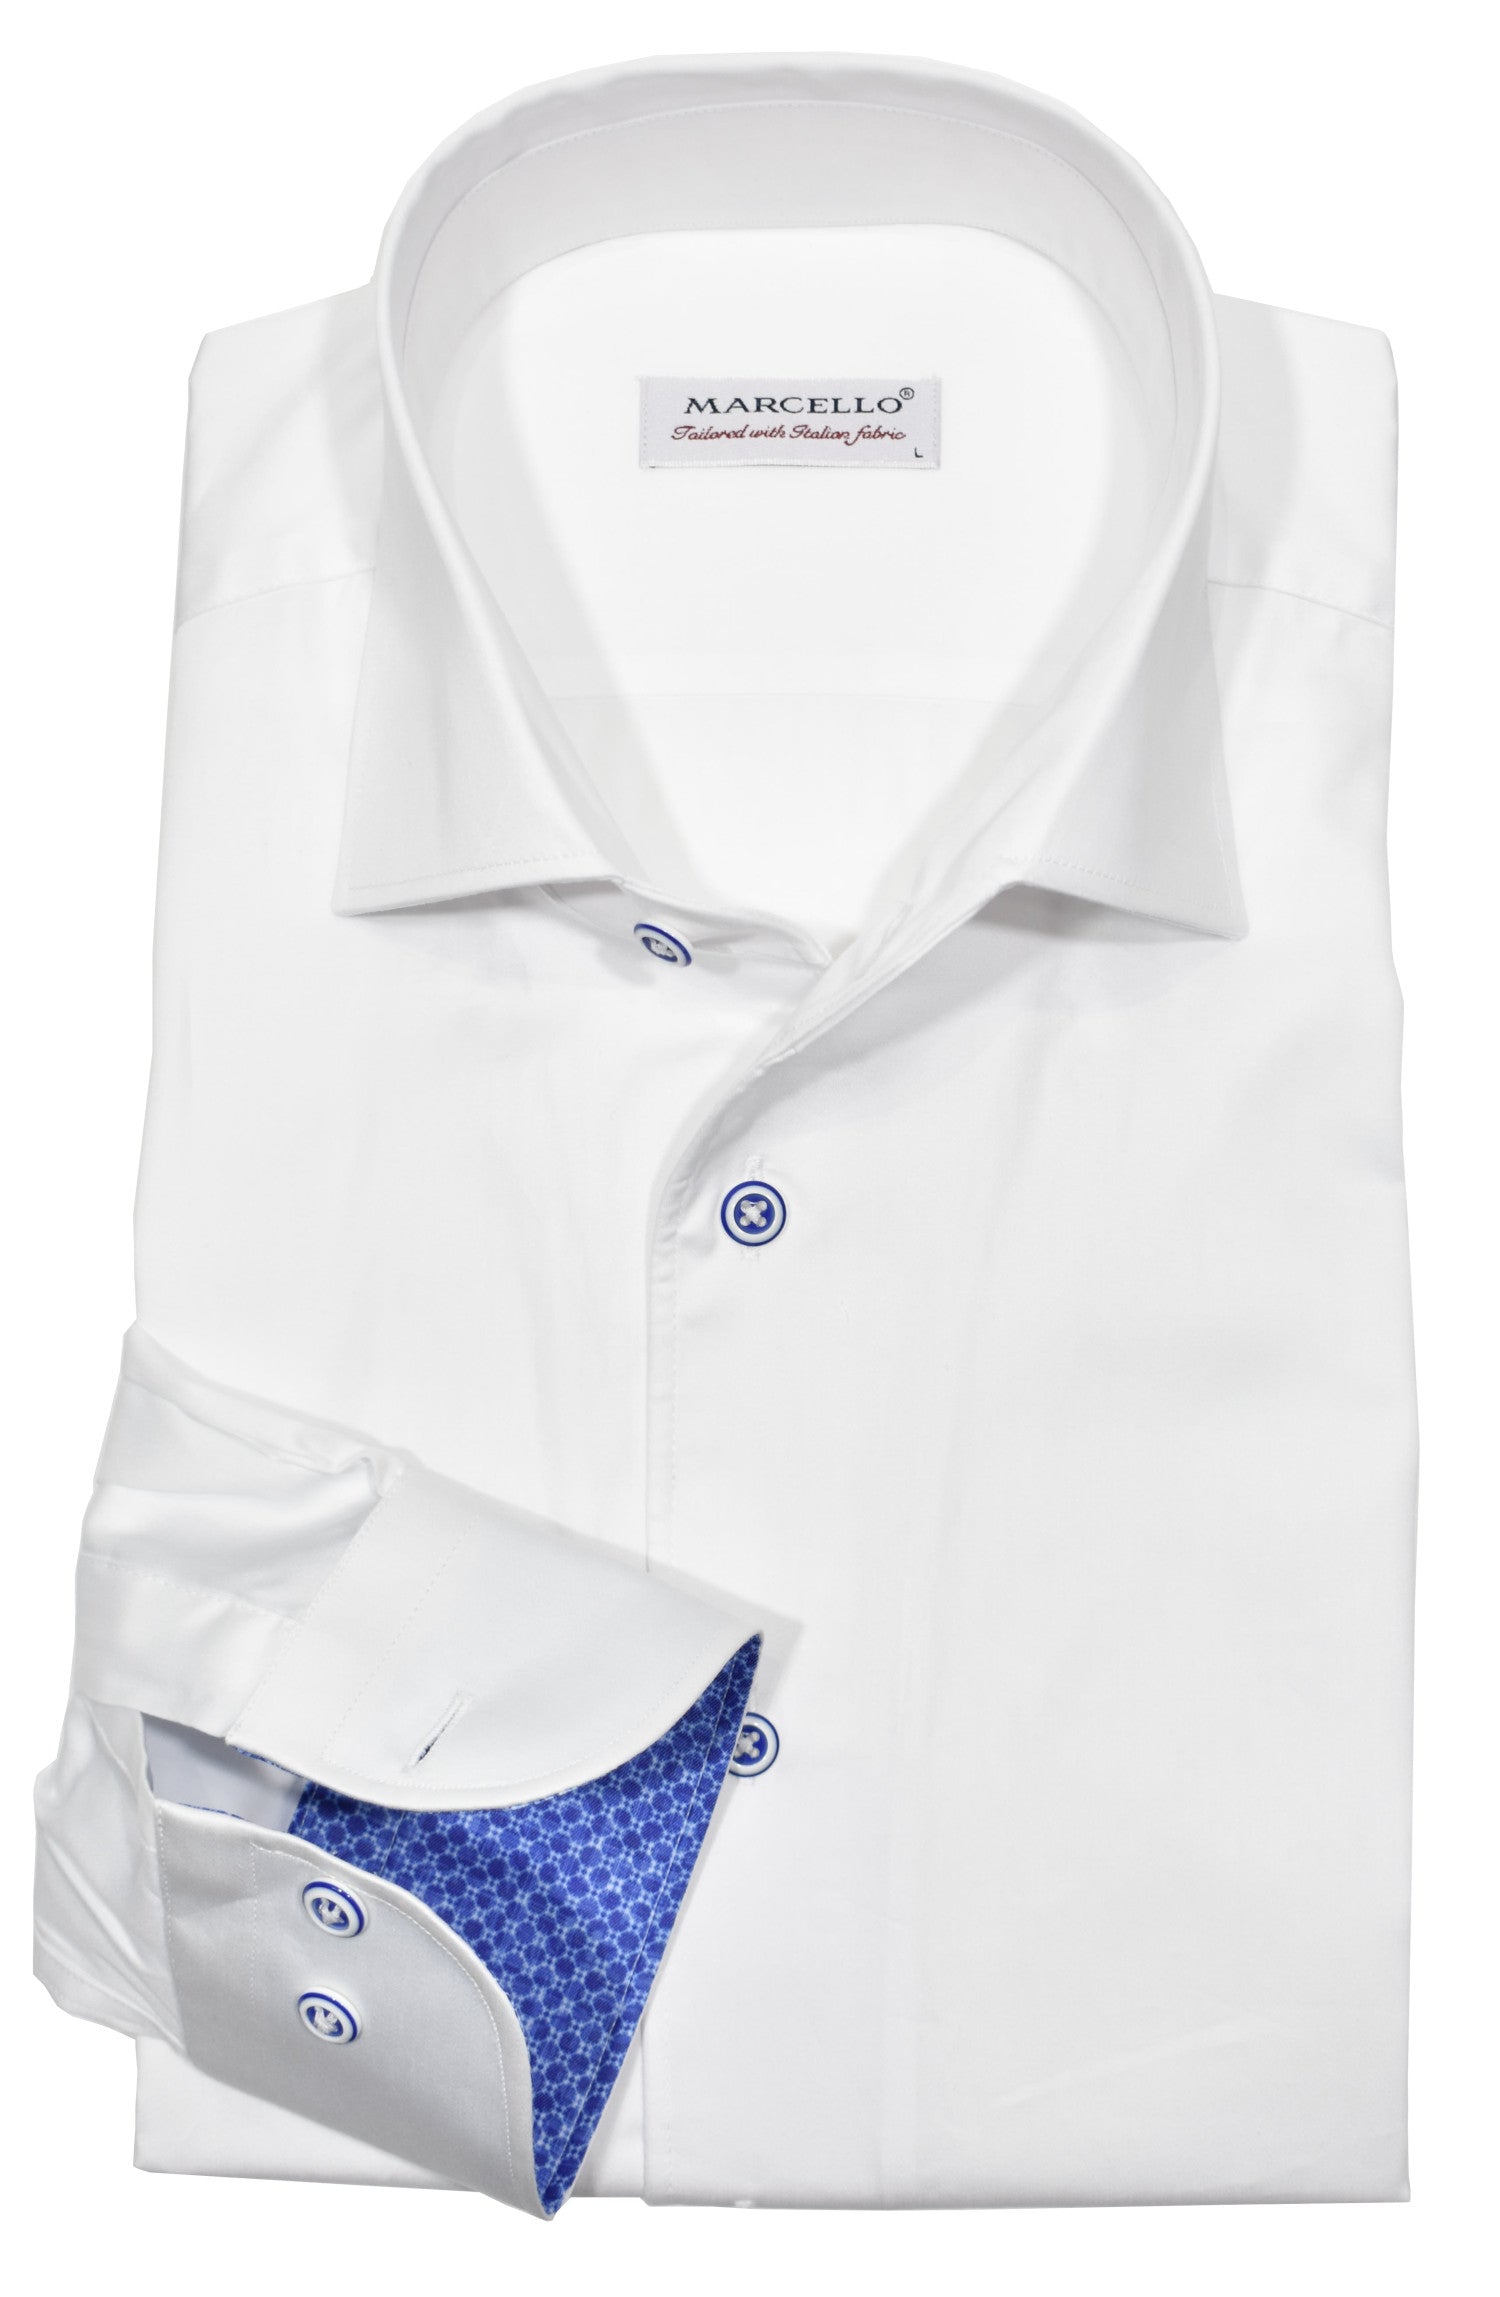 Introducing a wardrobe staple, the Classic Solid Cotton shirt. Made with soft cotton sateen fabric and customized buttons, this shirt exudes sophistication. The medium collar and unique accent trim fabric elevate your style, making a statement in any setting. By Marcello.